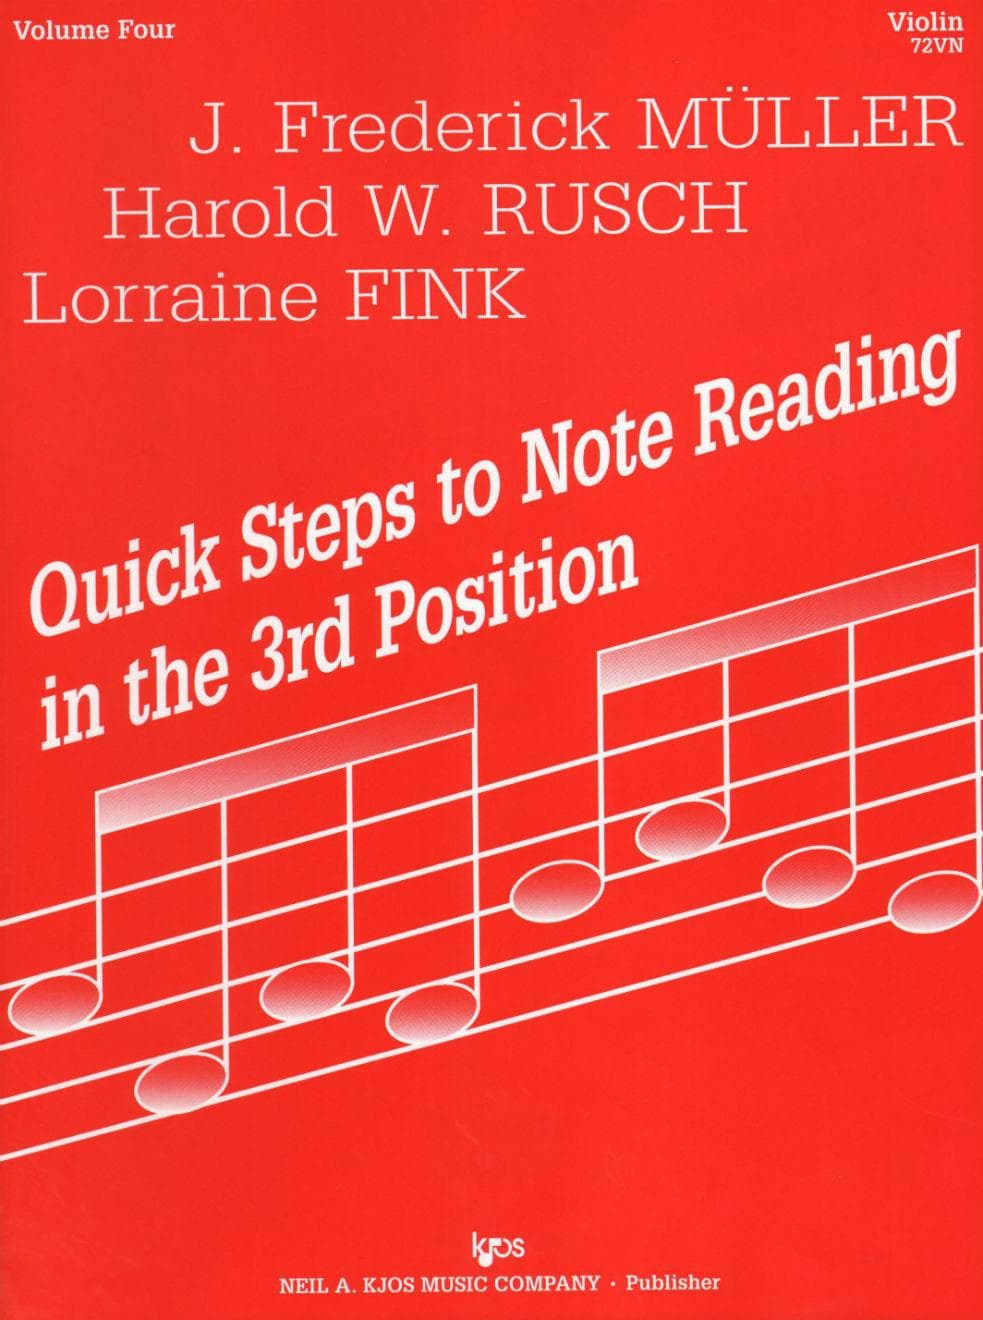 Fink/Müller/Rusch - Quick Steps To Note Reading, Book 4 - Violin - Neil A Kjos Music Co